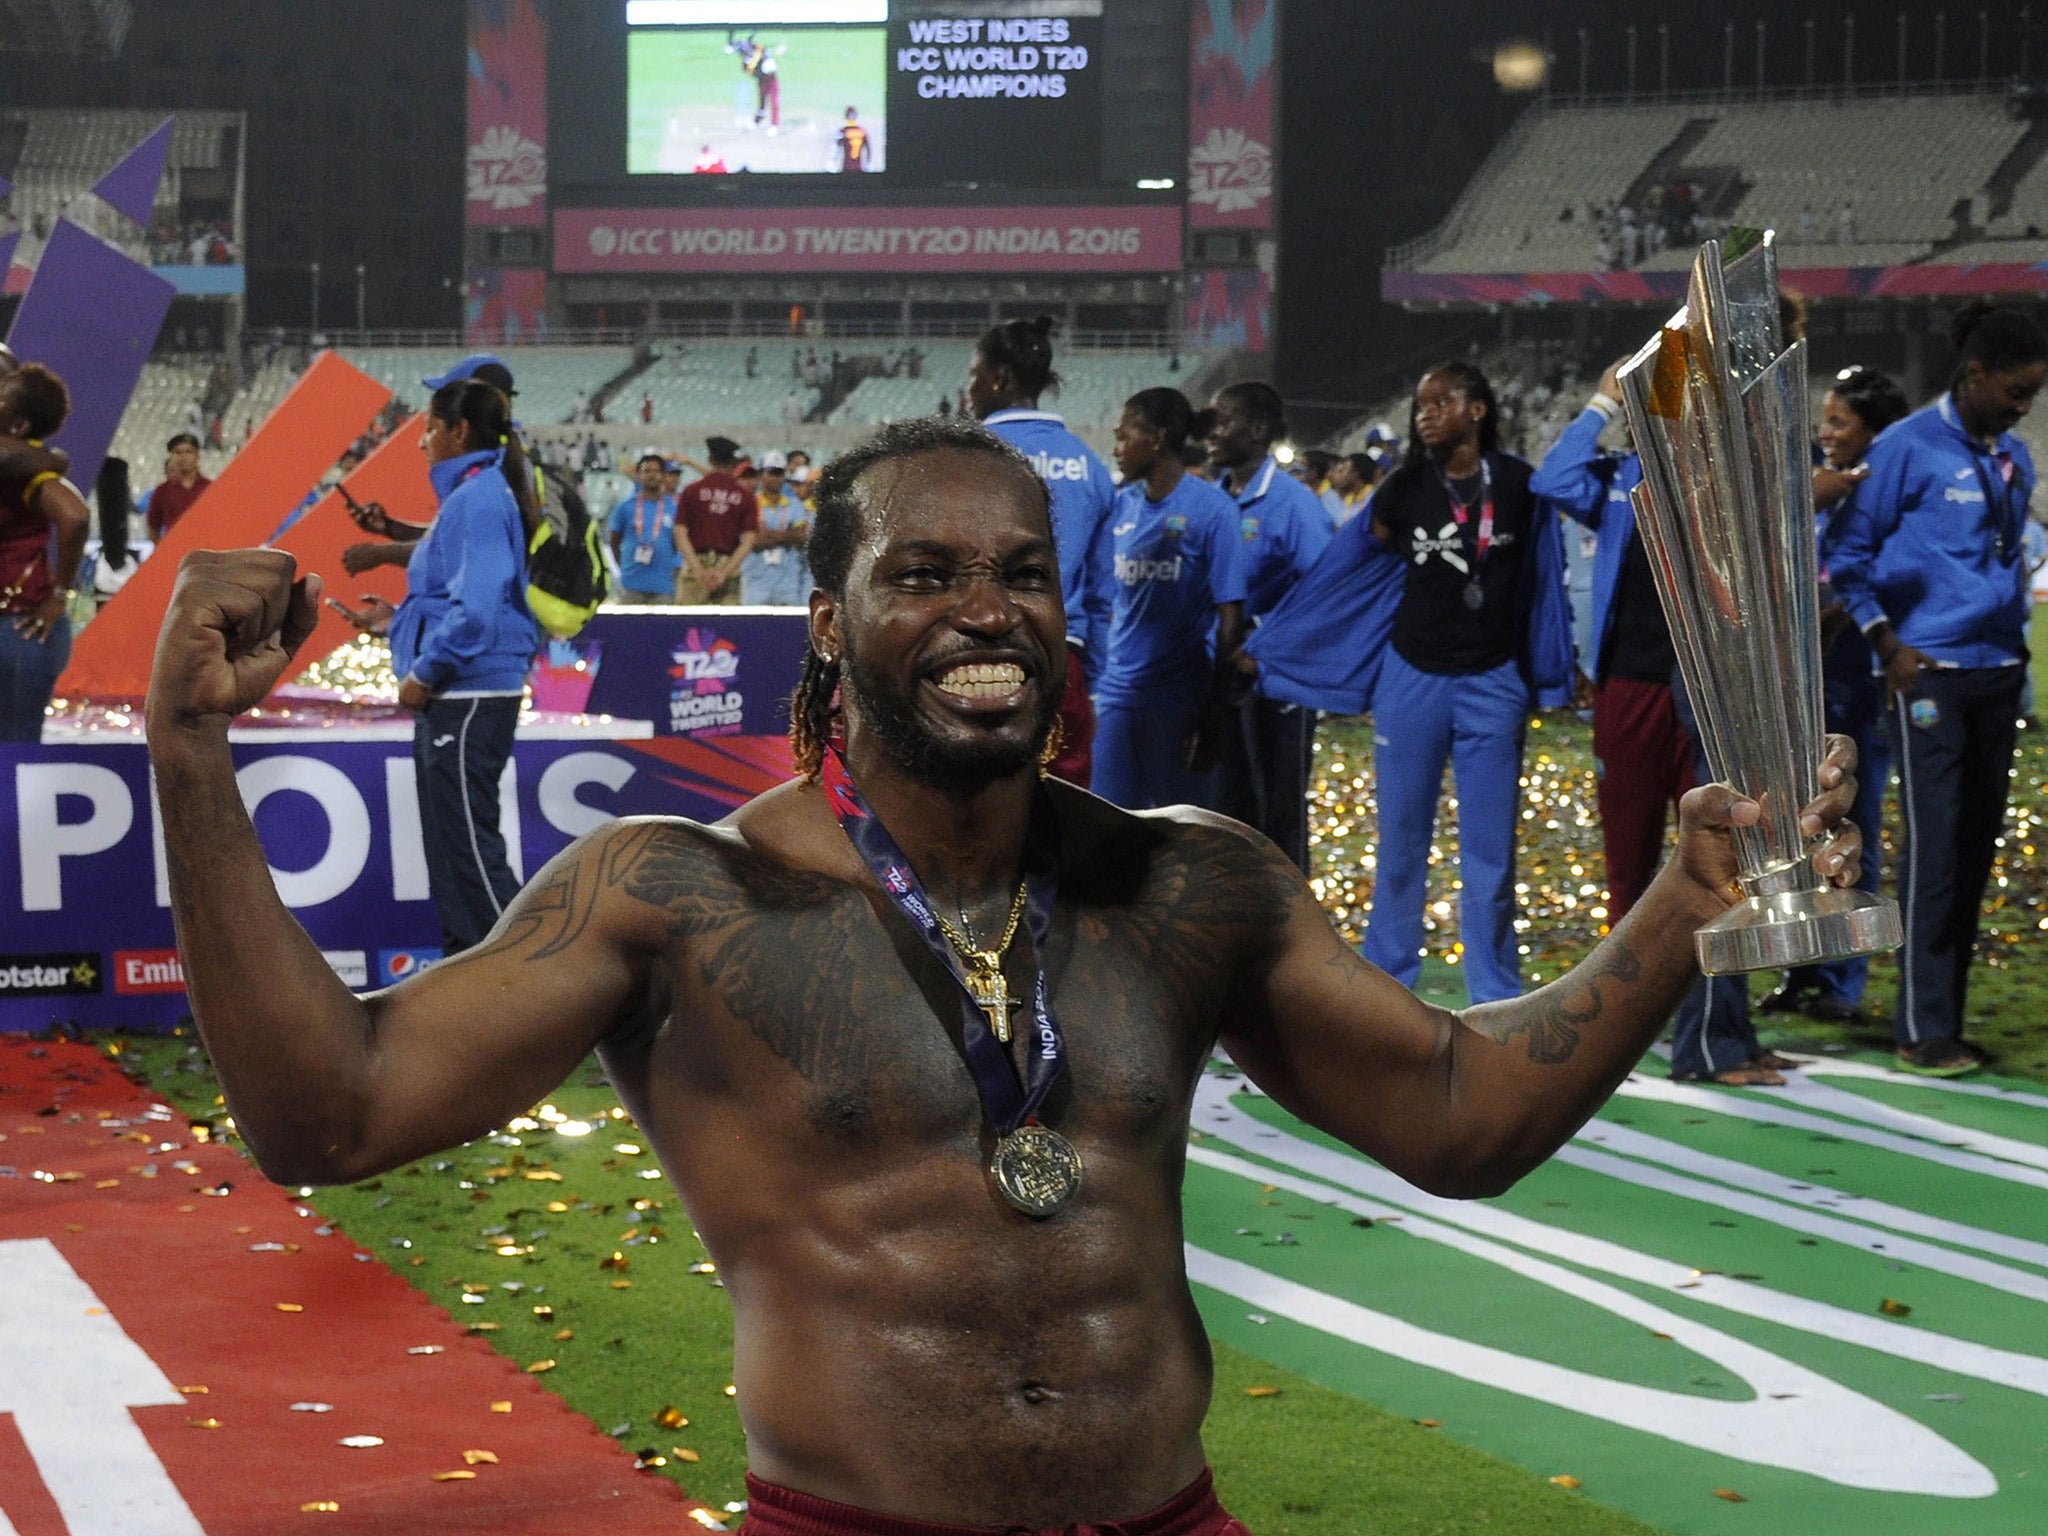 Chris Gayle Sex - Chris Gayle: West Indies cricketer asks female journalist how many black  men she has slept with in latest interview | The Independent | The  Independent